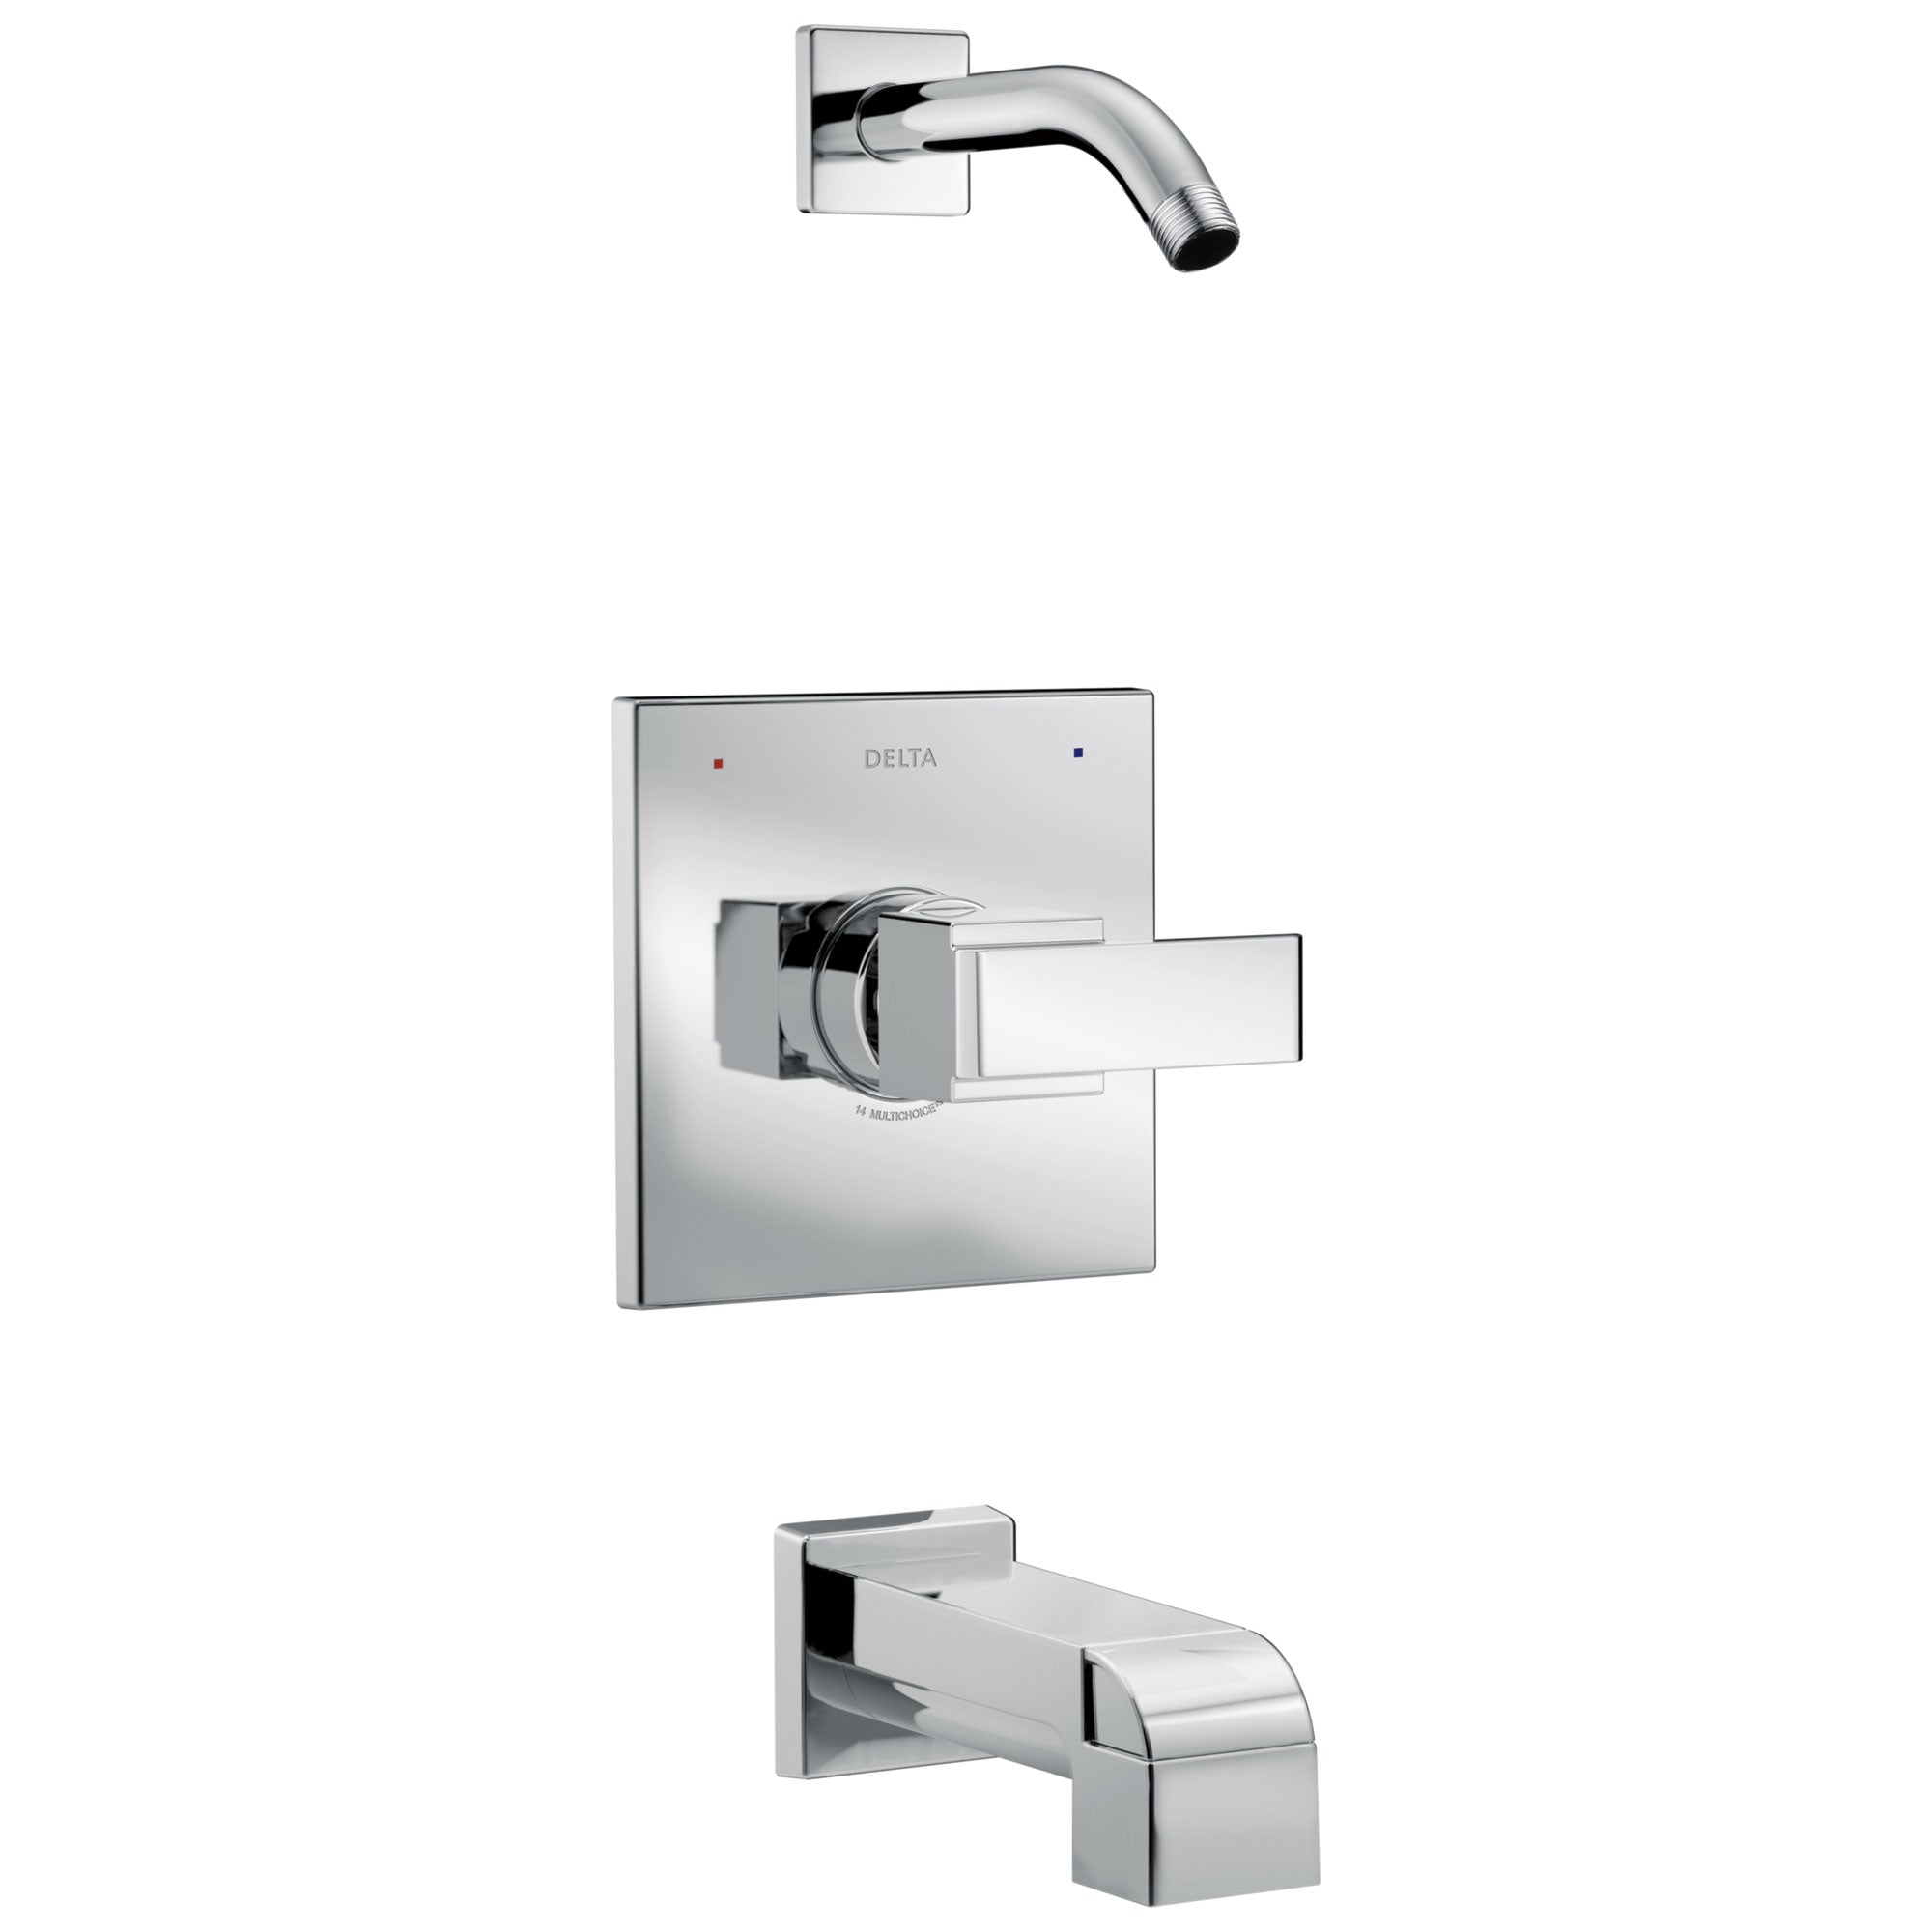 Delta Ara Collection Chrome Monitor 14 Series Modern Square Tub and Shower Combination Faucet Trim Kit - Less Showerhead (Requires Valve) DT14467LHD